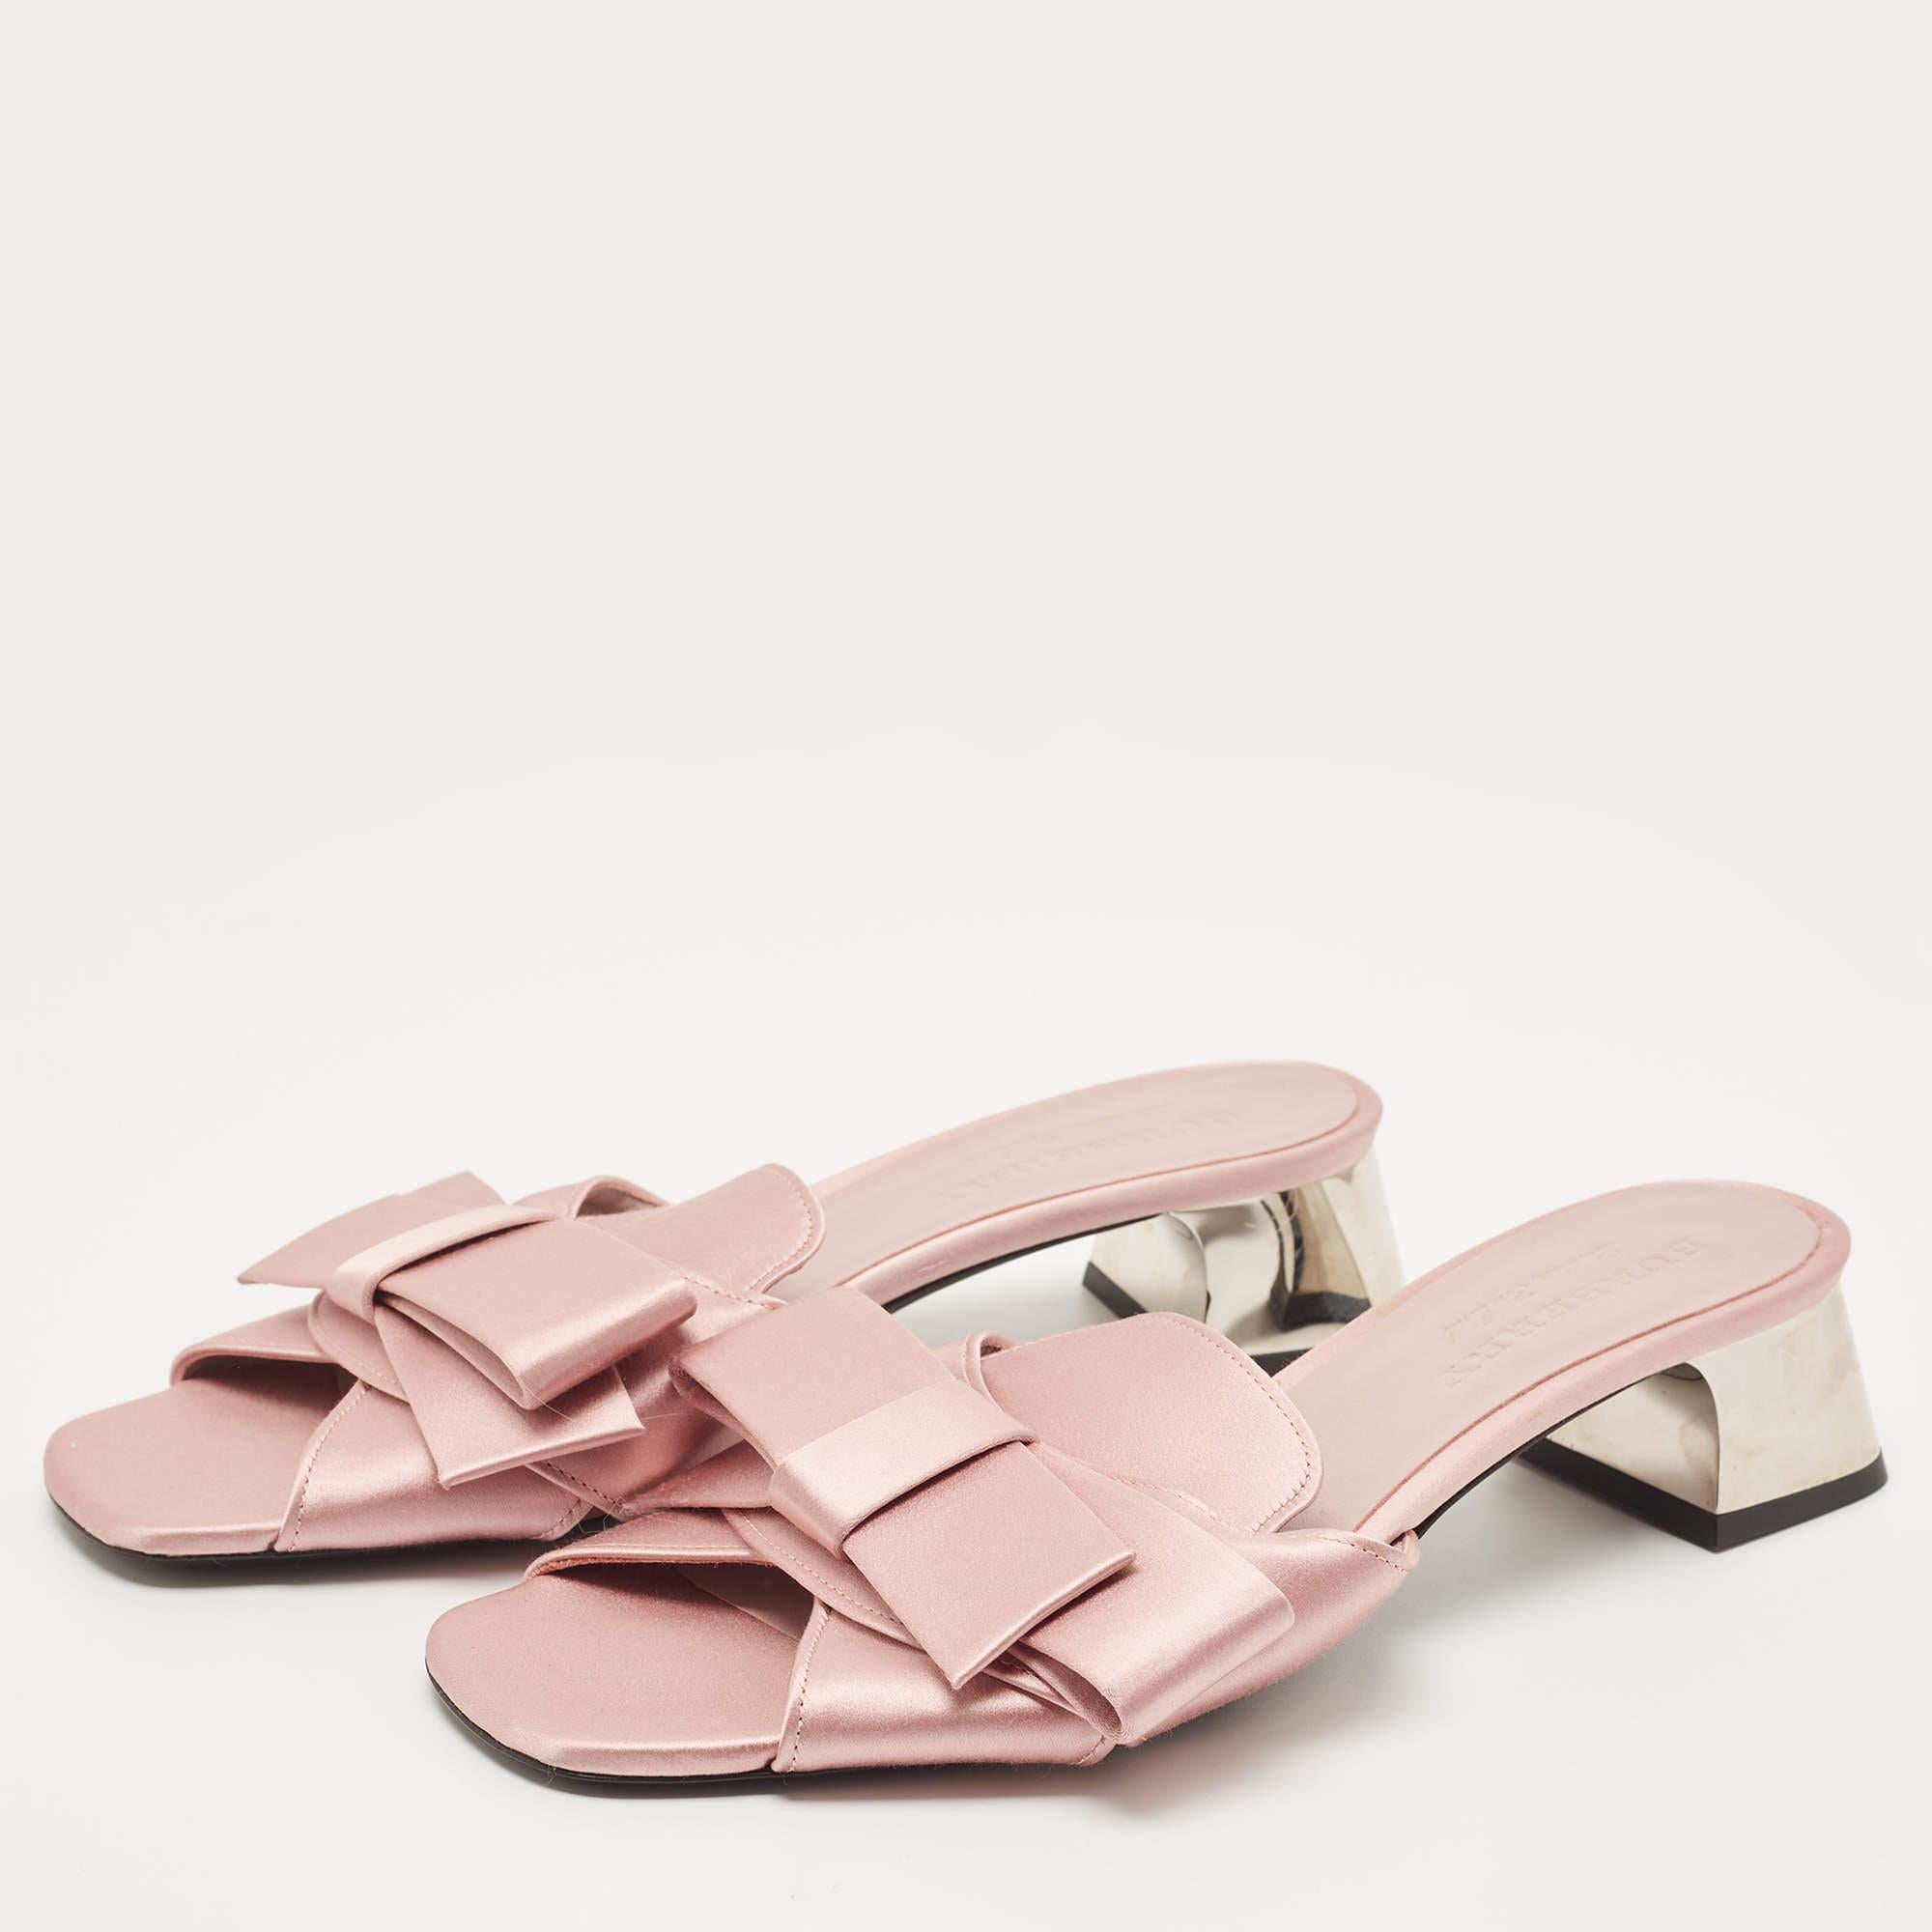 Women's Burberry Pink Satin Bow Mules Size 41